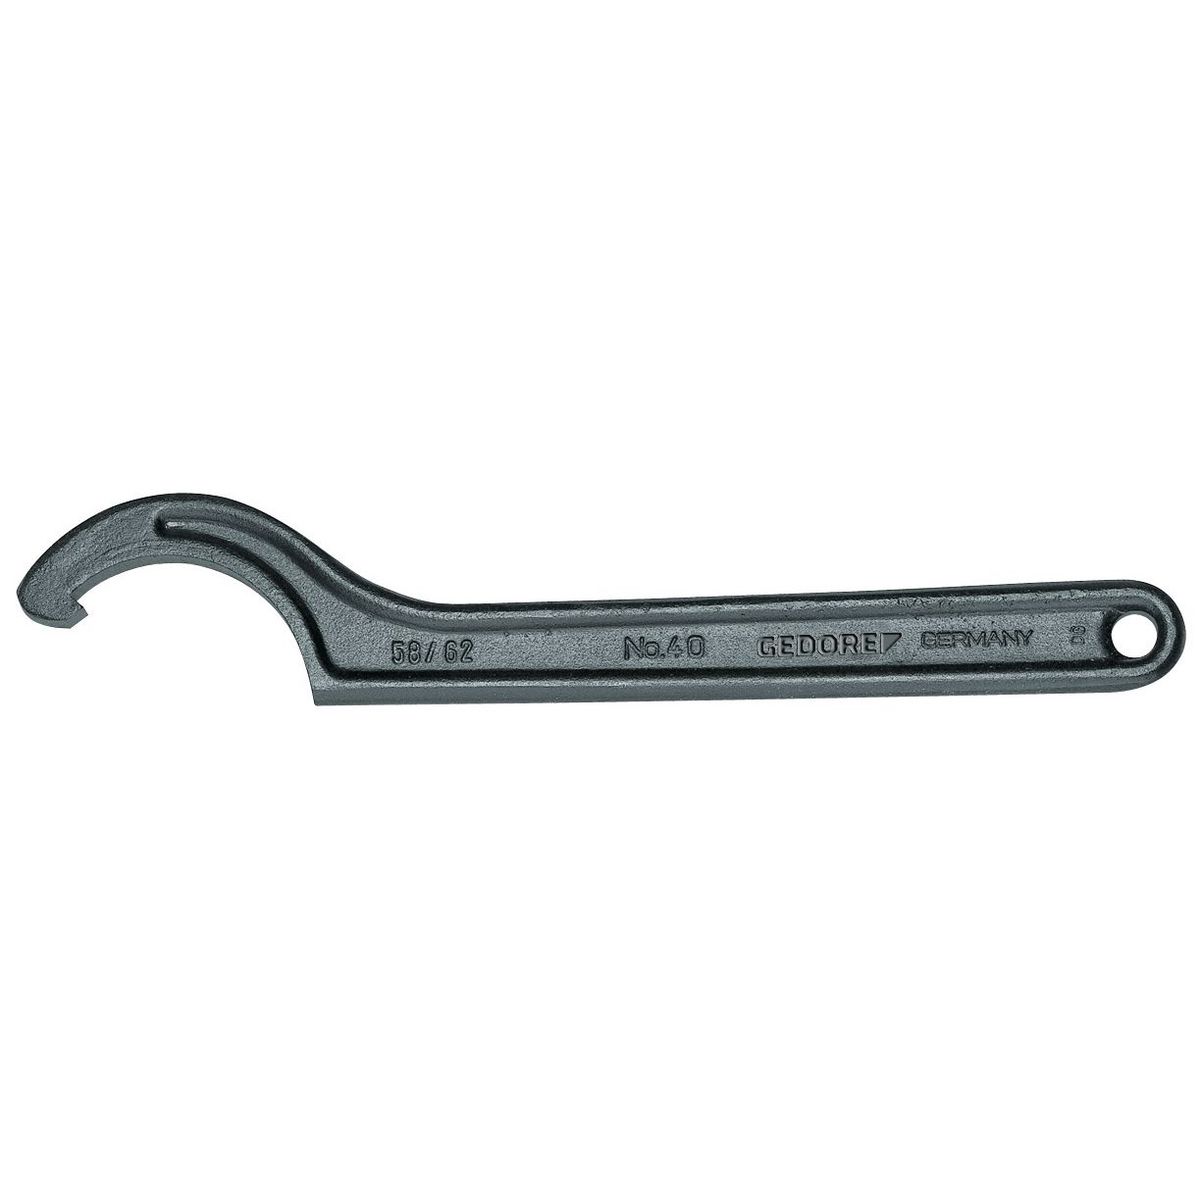 Hook wrench with lug, 135-145mm No.40 135-145 Gedore